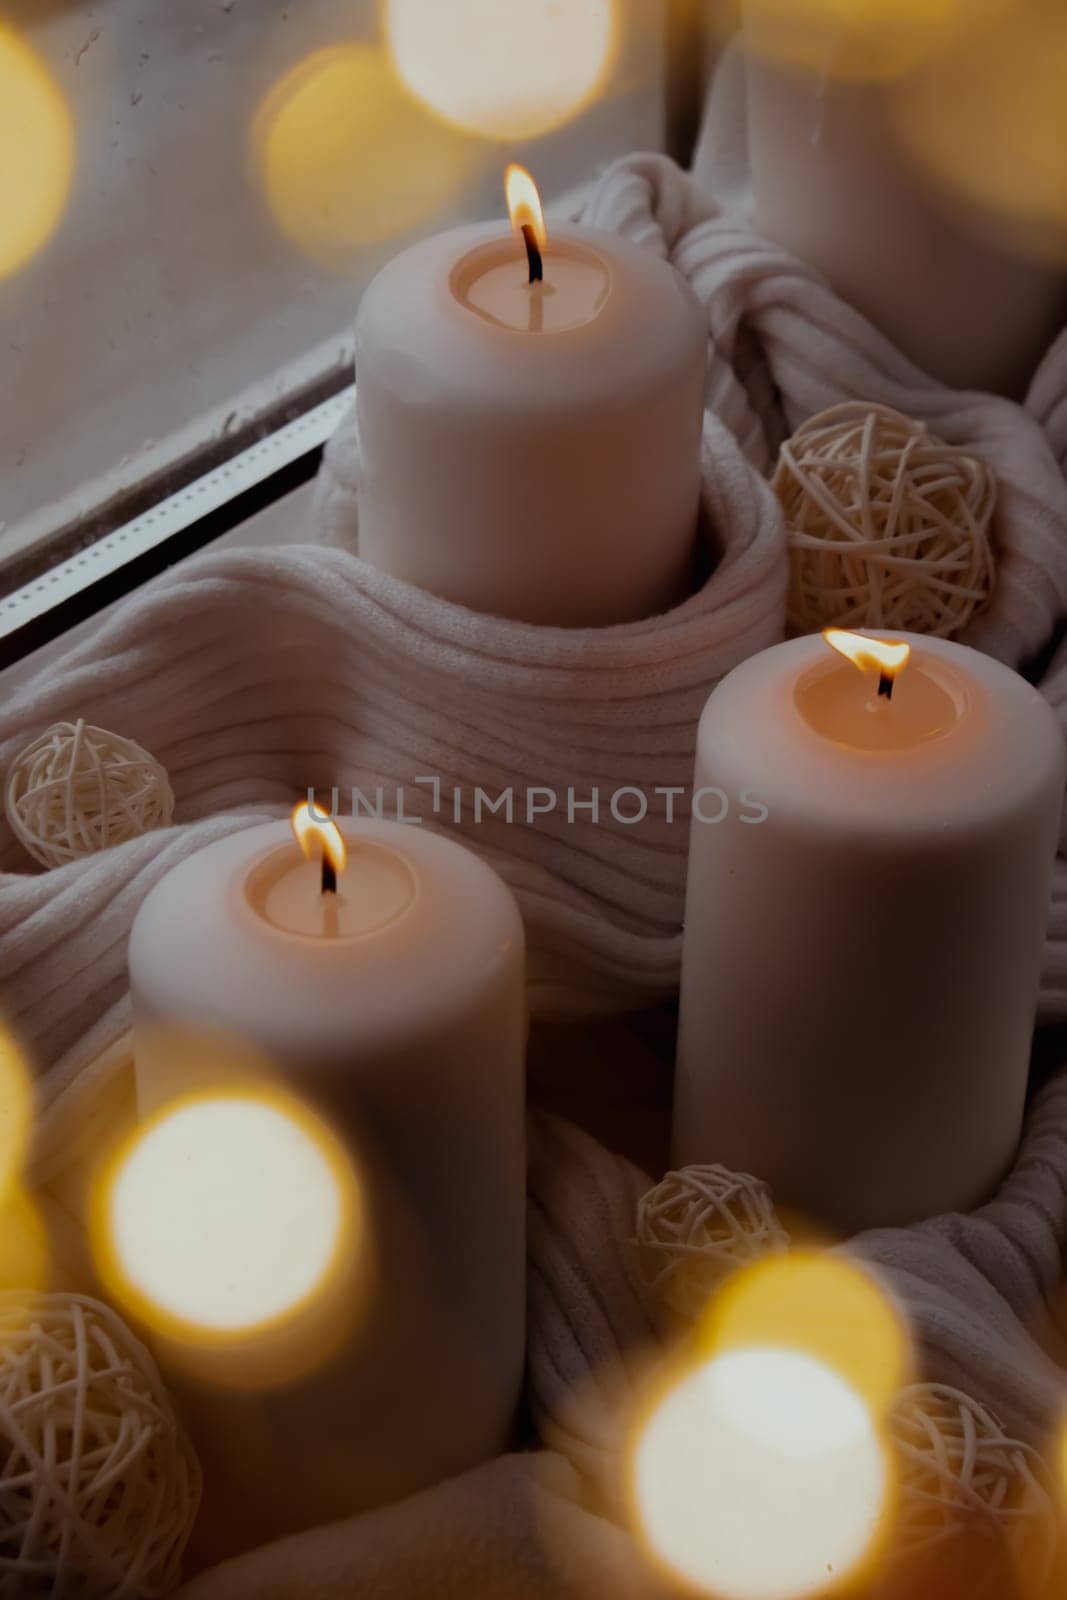 Bokeh light Home fragnance concept autumn holidays at cozy home on the windowsill Hygge aesthetic atmosphere on knitted white sweater. Still life of micro moment candid slow living. Mental health wellbeing exercises Raining Outside